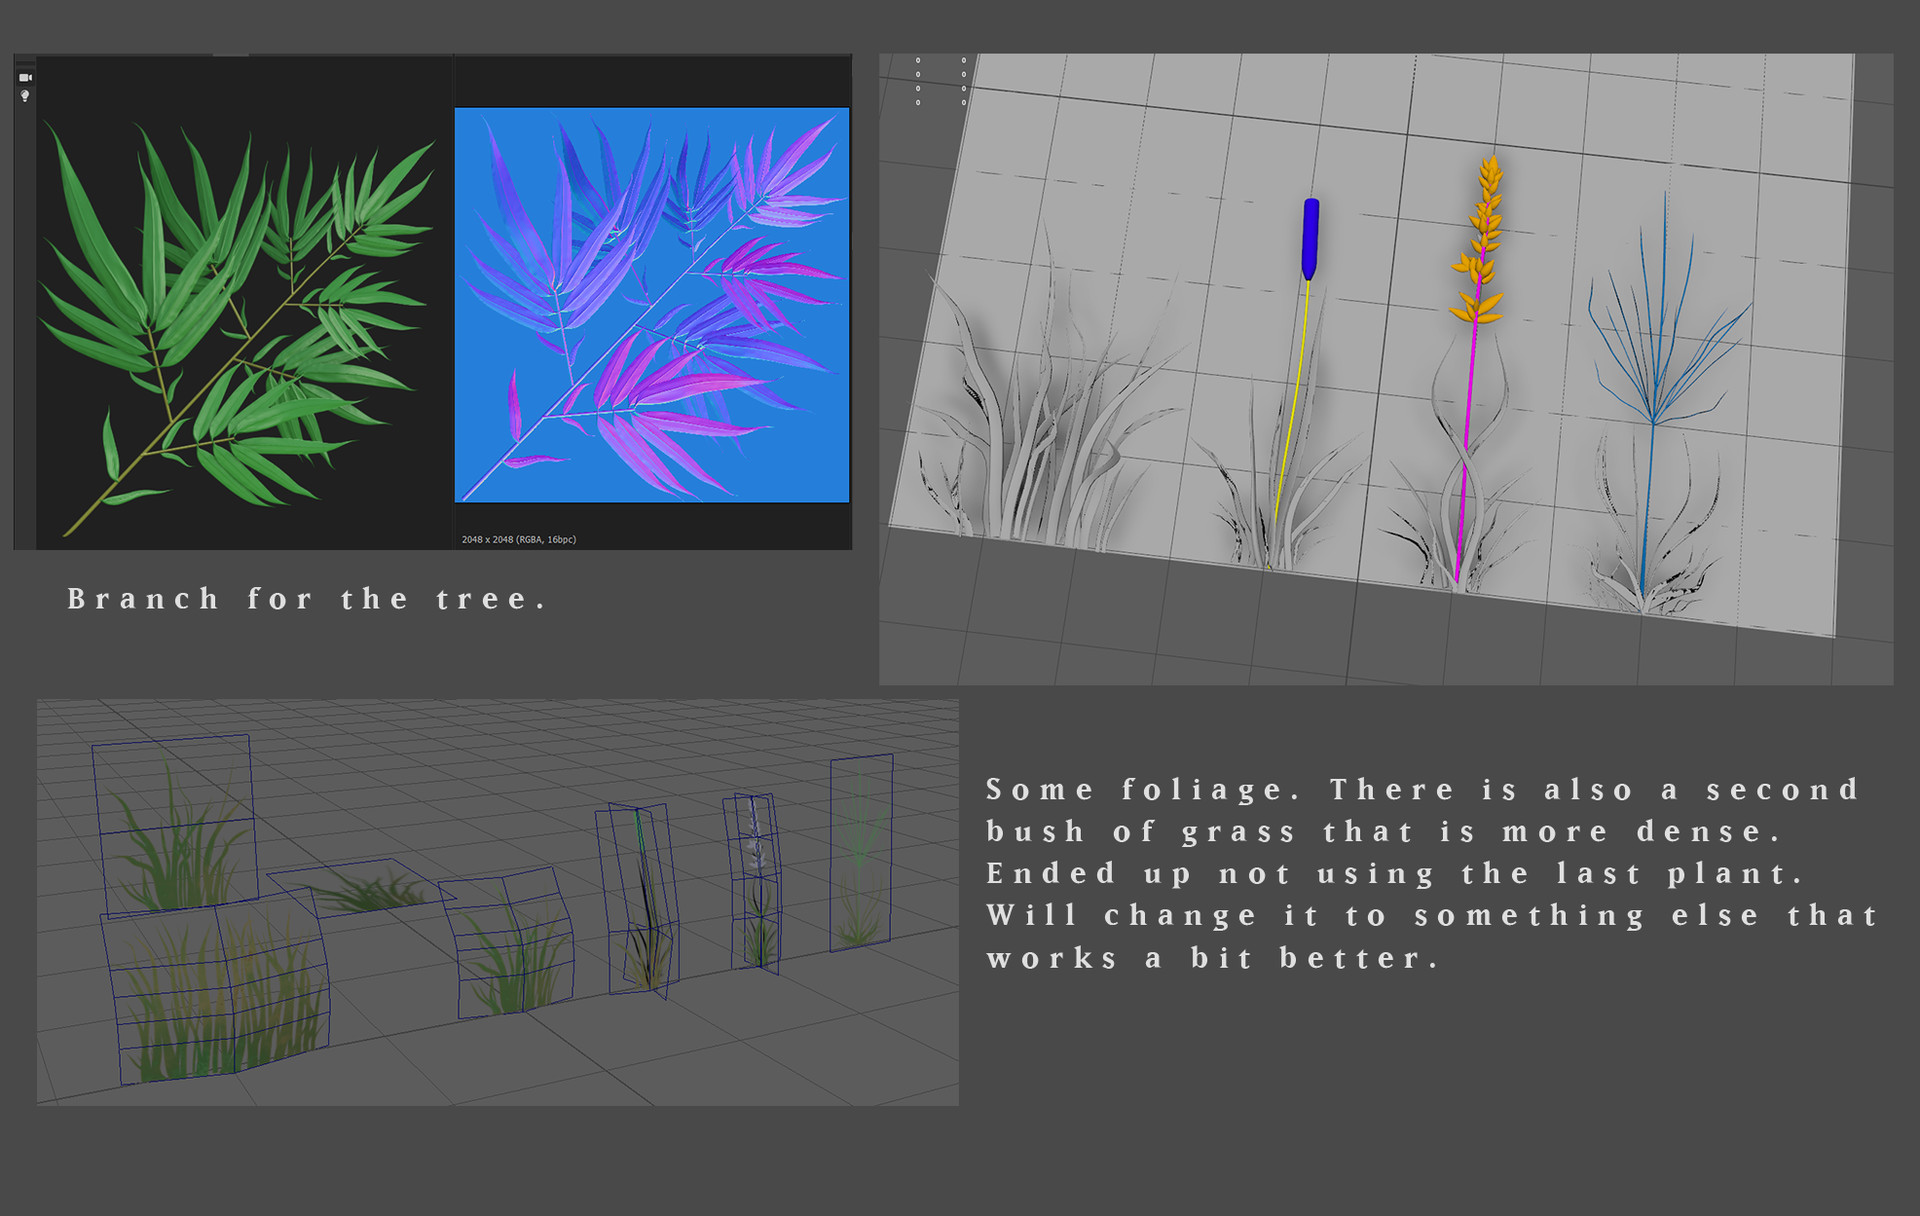 3 screenshot put into one. First one is from Substance Designer and shows a bake of a branch and leaves card. Next is a Maya screenshot showing 4 different grasses and shrubs and flowers put onto a plane. Last screenshot is 3D cards building up the foliage. Text next to it reads “Some foliage. There is also a second bush of grass that is more dense. Ended up not using the last plant. Will change it to something else that works a bit better.”